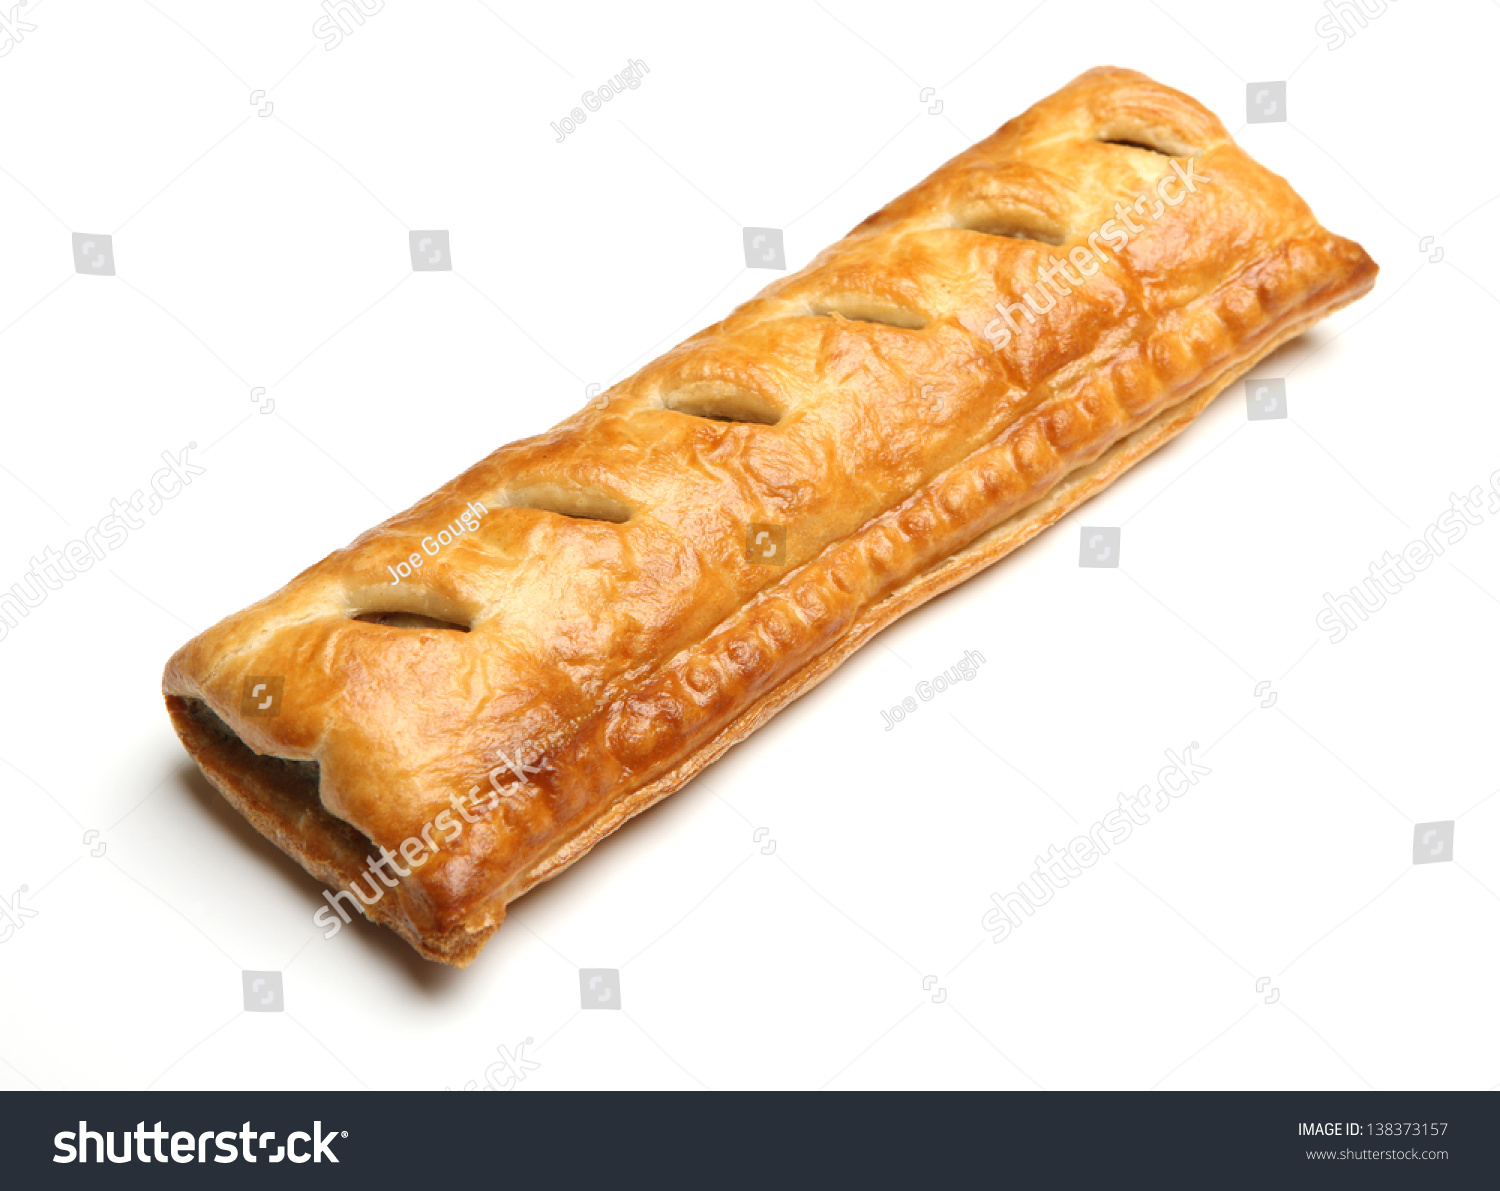 Large Sausage Roll On White Background Stock Photo 138373157 : Shutterstock